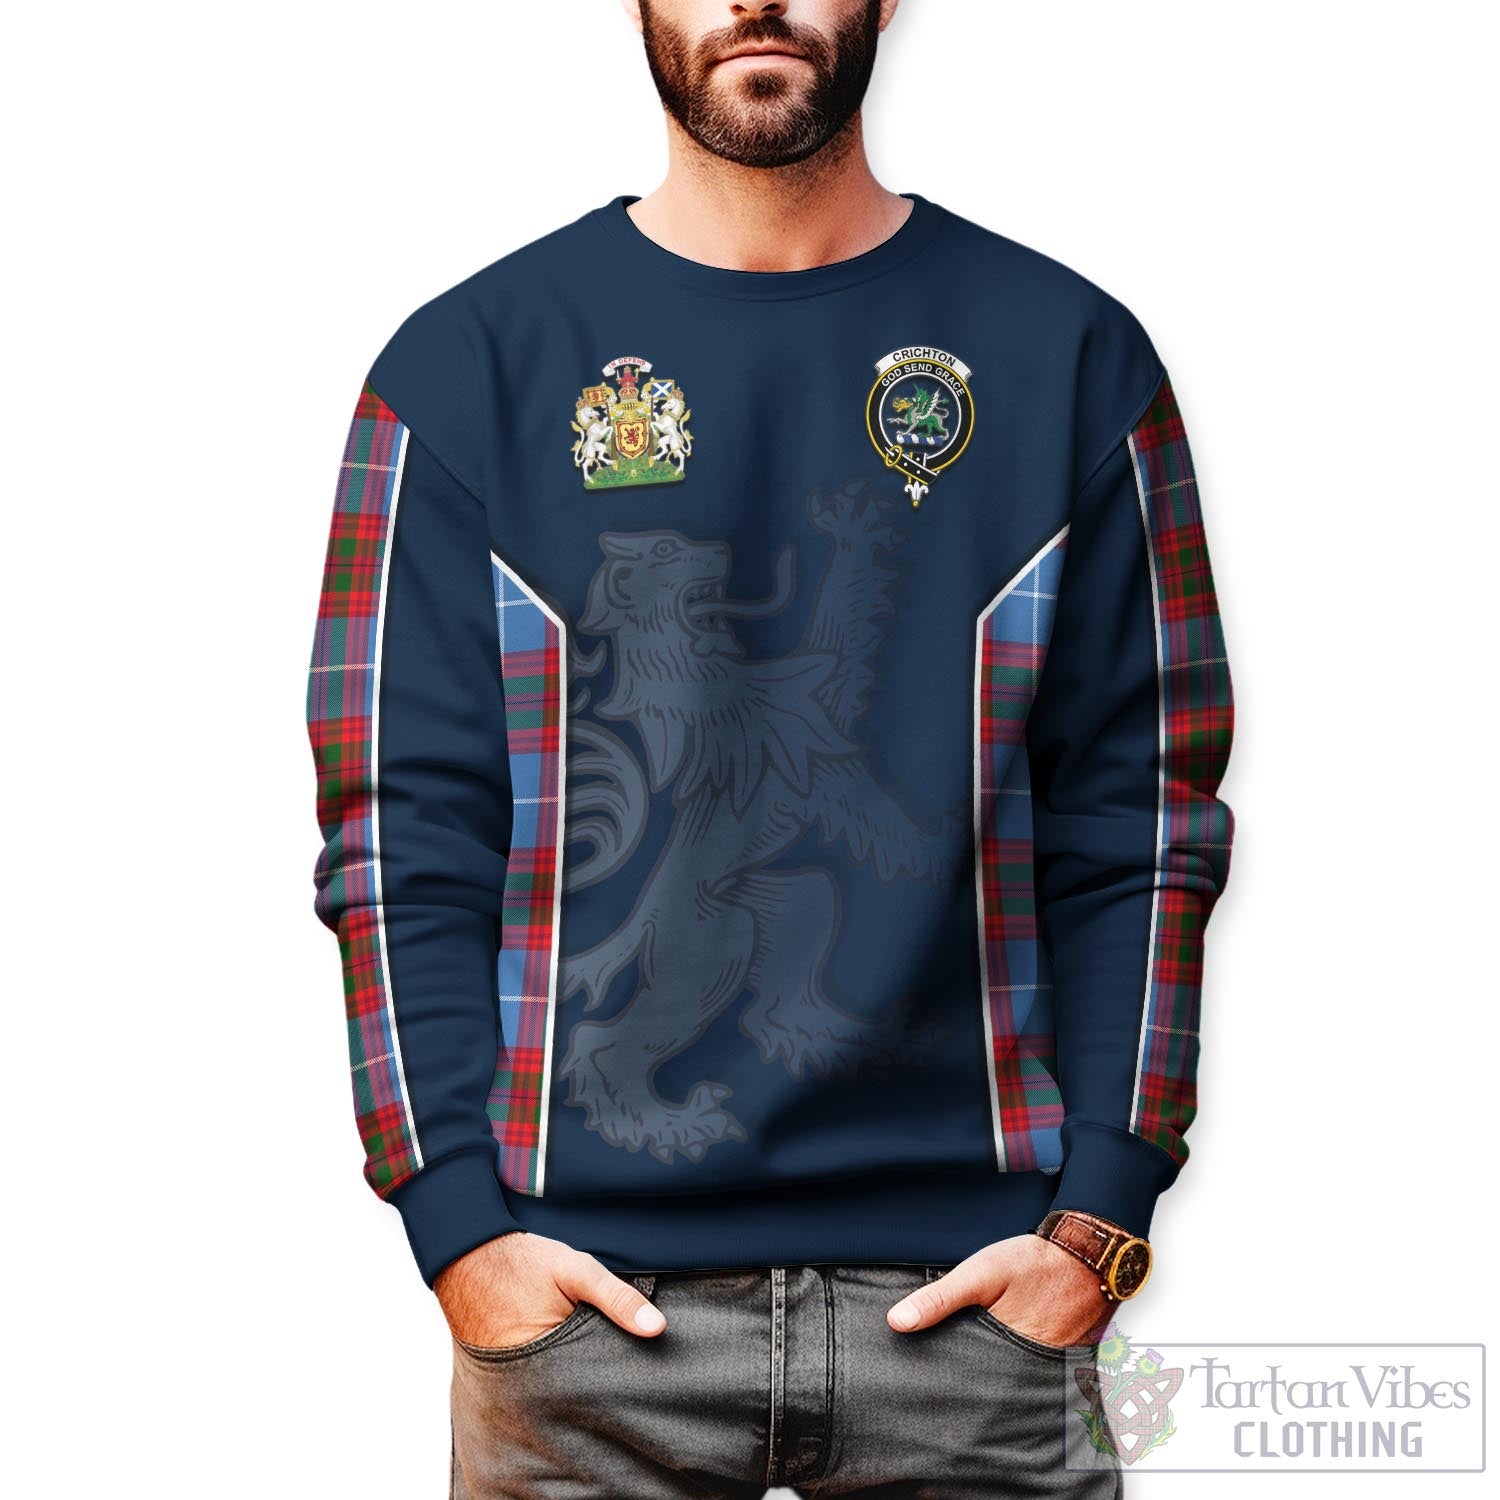 Tartan Vibes Clothing Crichton Tartan Sweater with Family Crest and Lion Rampant Vibes Sport Style